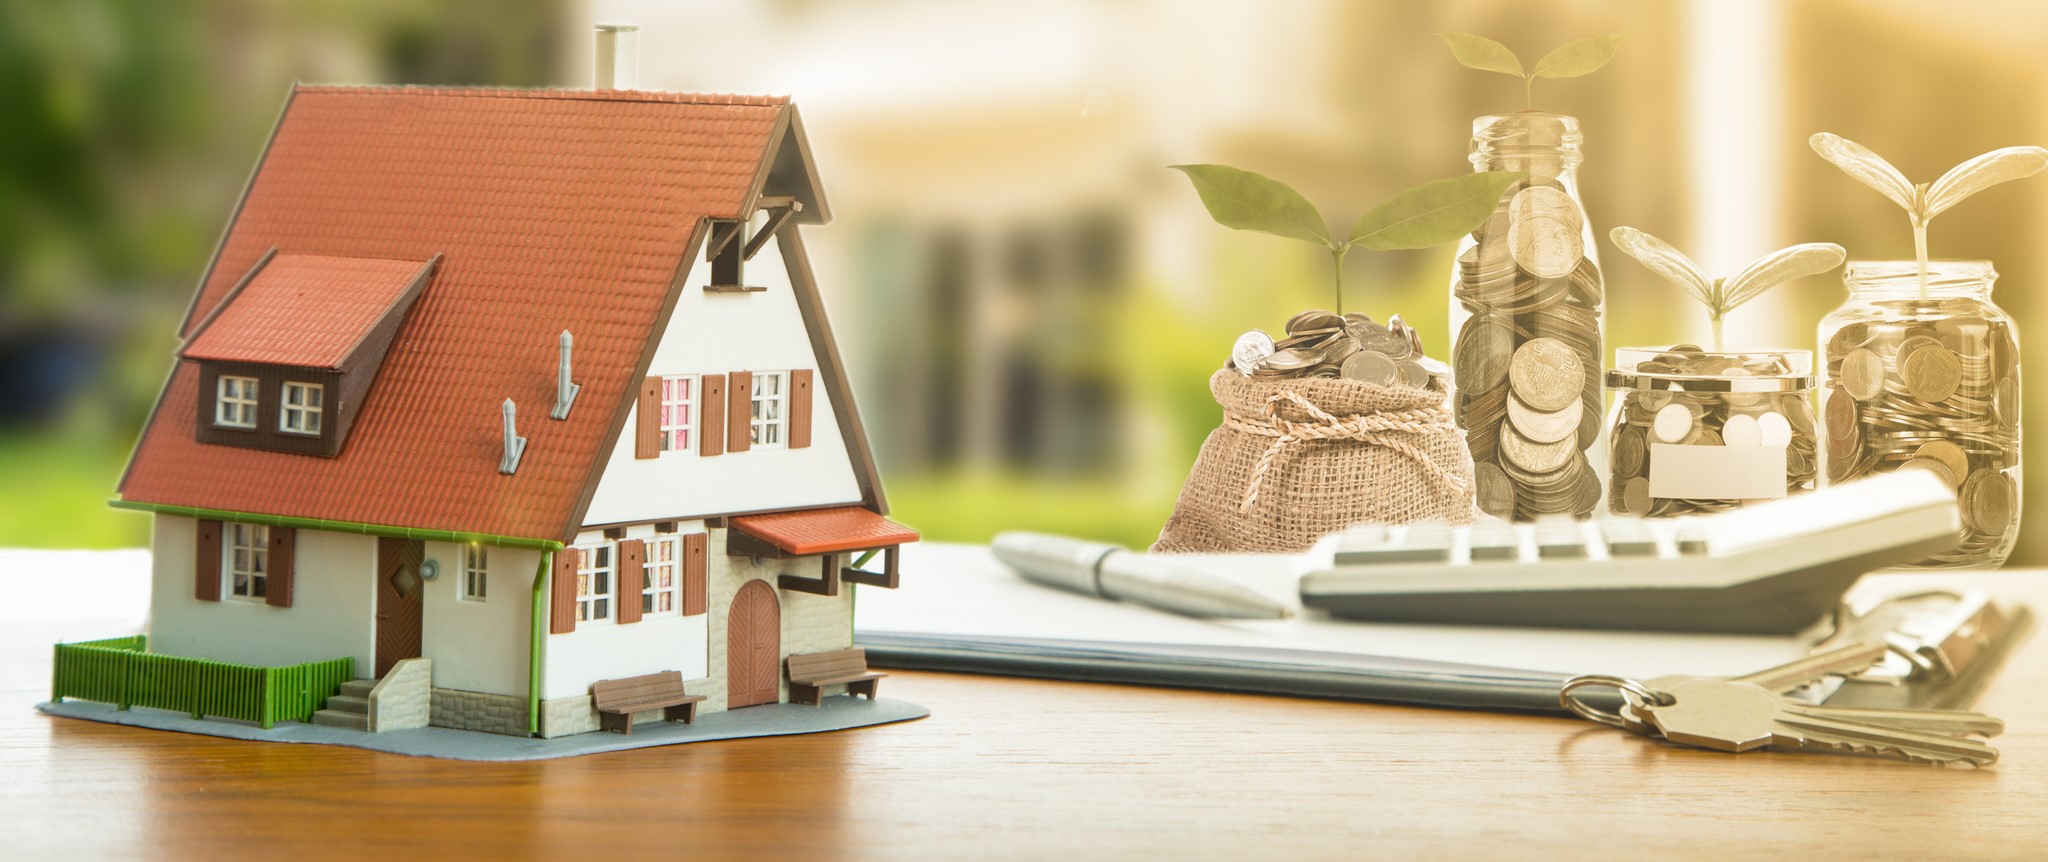 4 Ways to Expand Your Real Estate Investment - Save A Little Money